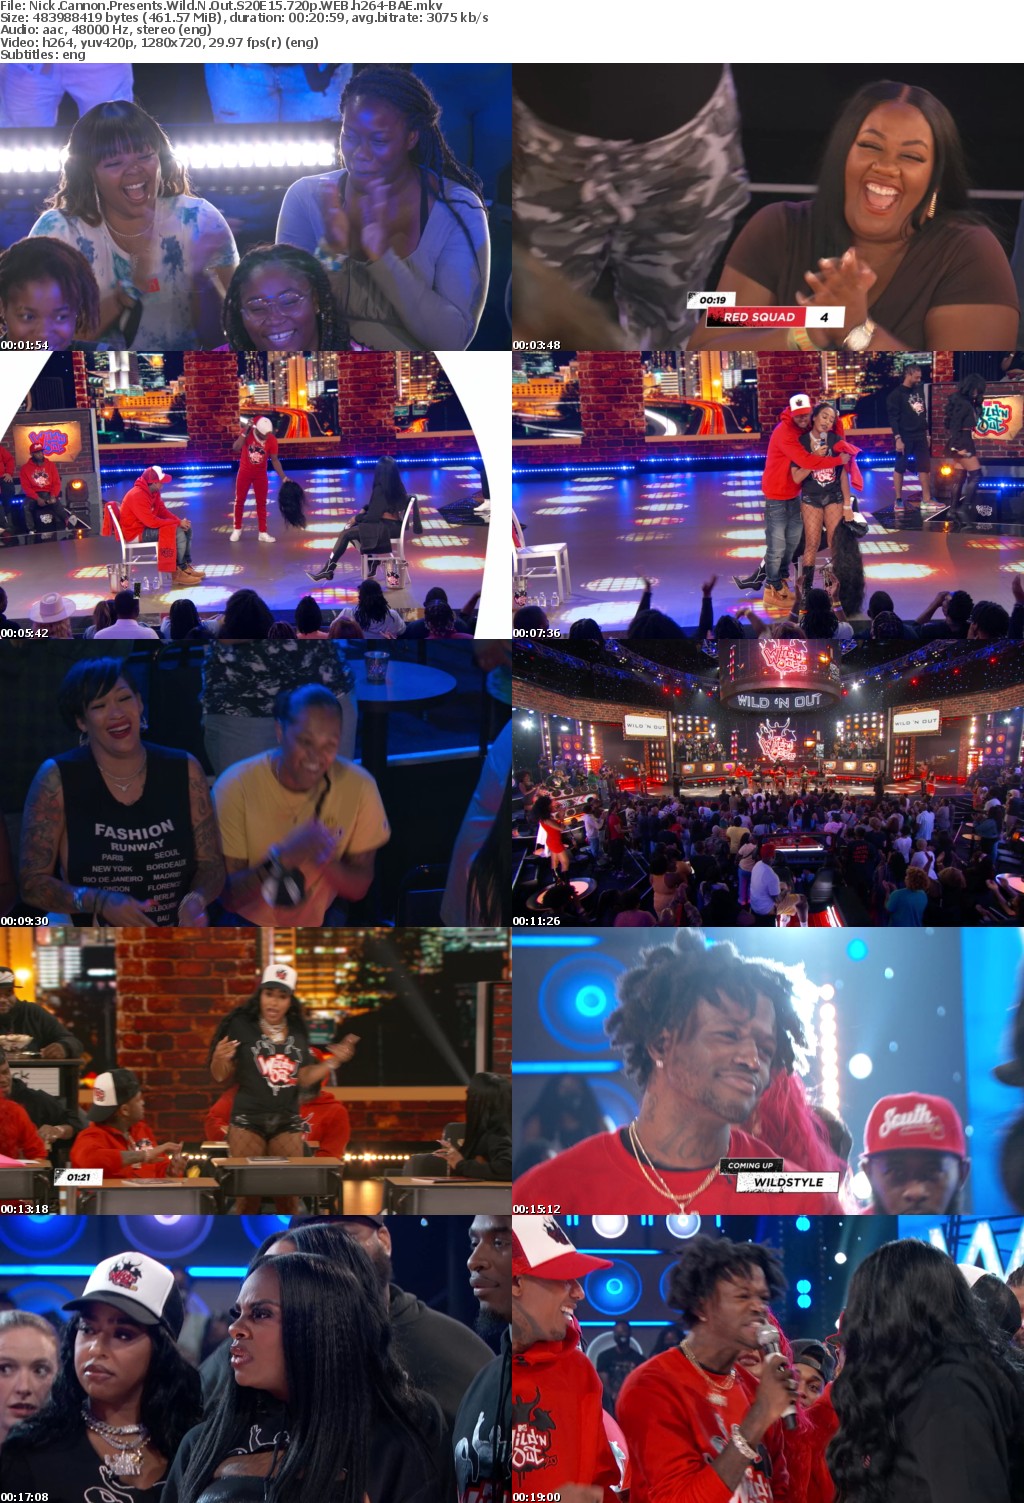 Nick Cannon Presents Wild N Out S20E15 720p WEB h264-BAE